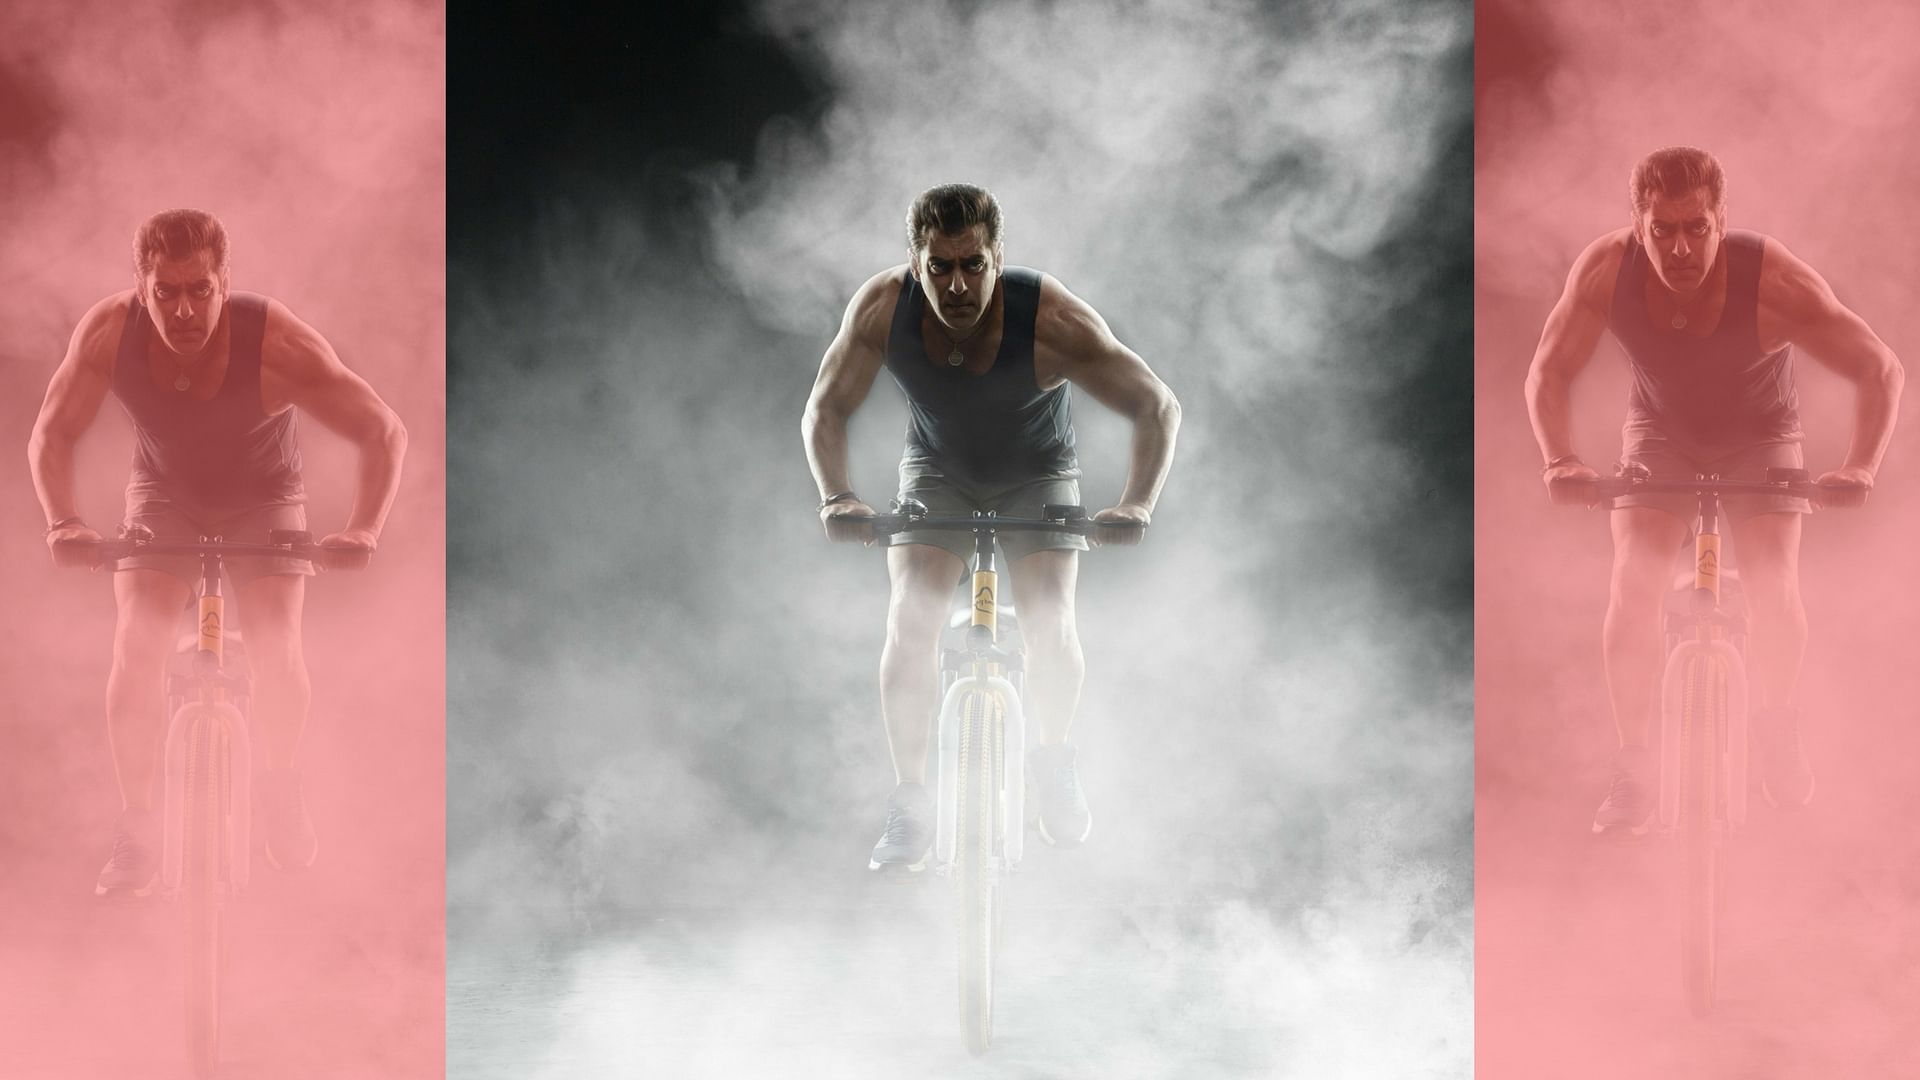 There’s a reason for all that smoke used in the promotional picture of Salman Khan’s e-cycle launch. (Photo courtesy: Twitter)